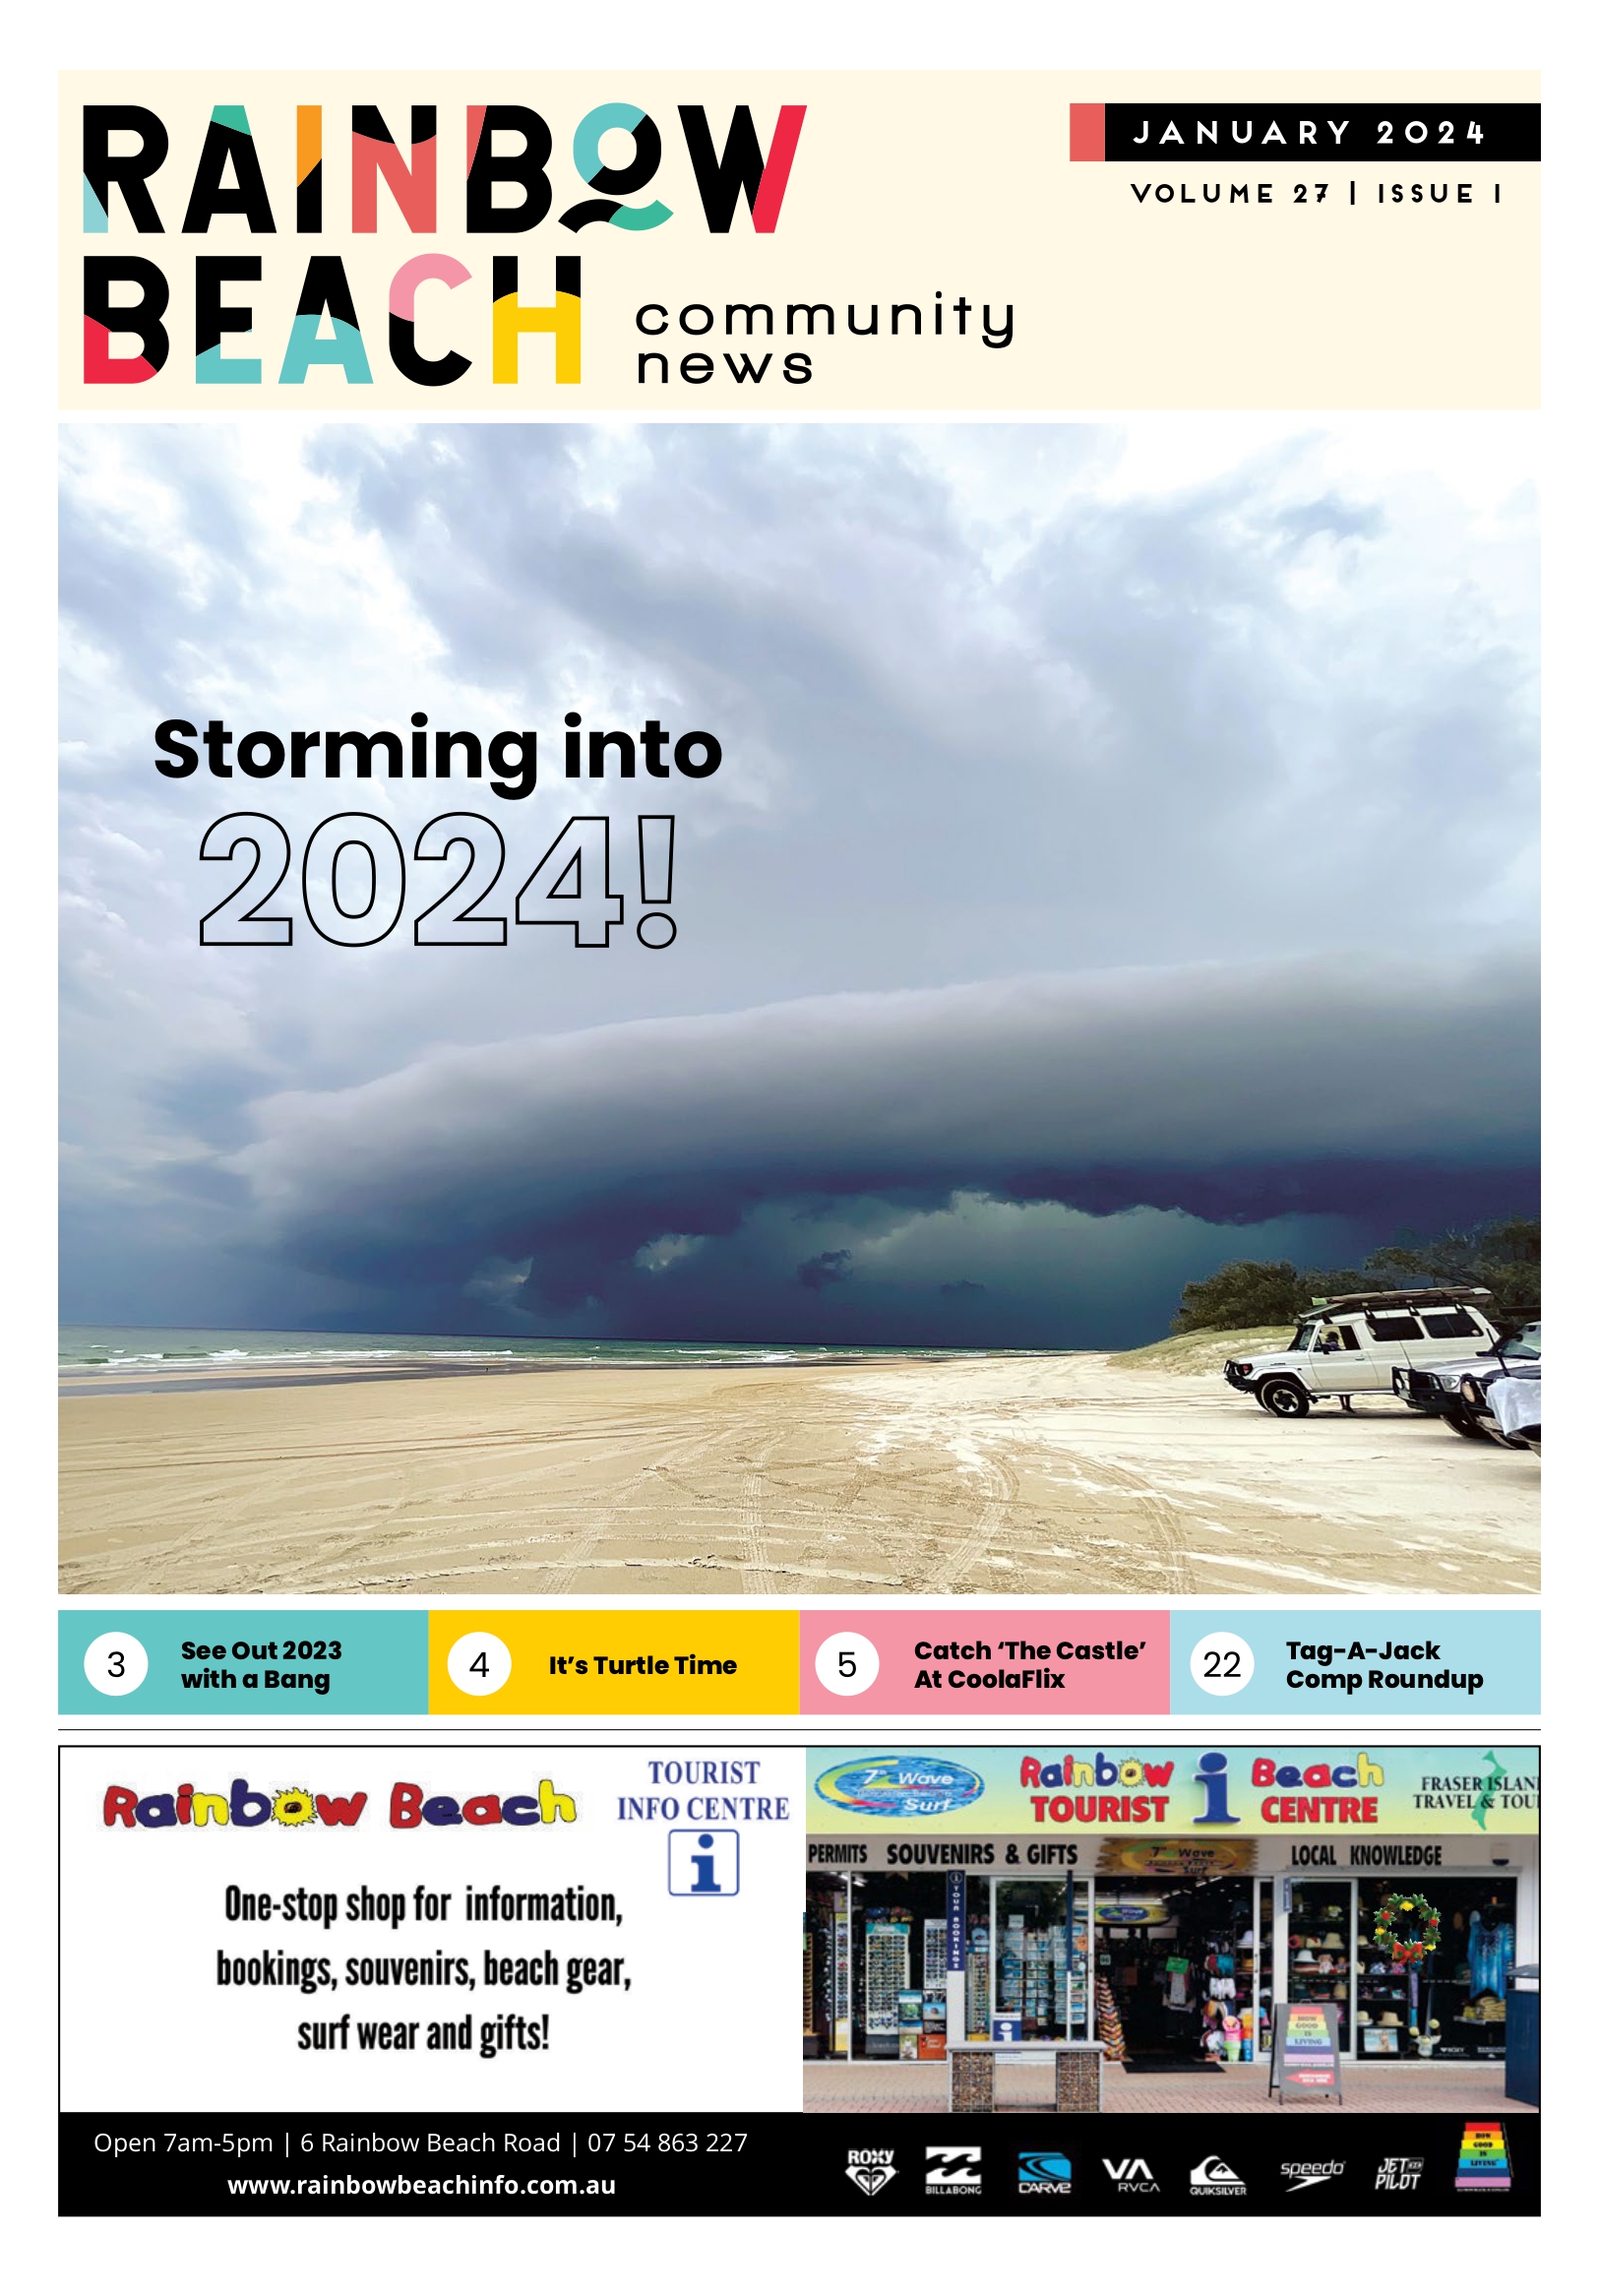 Click to read the online edition